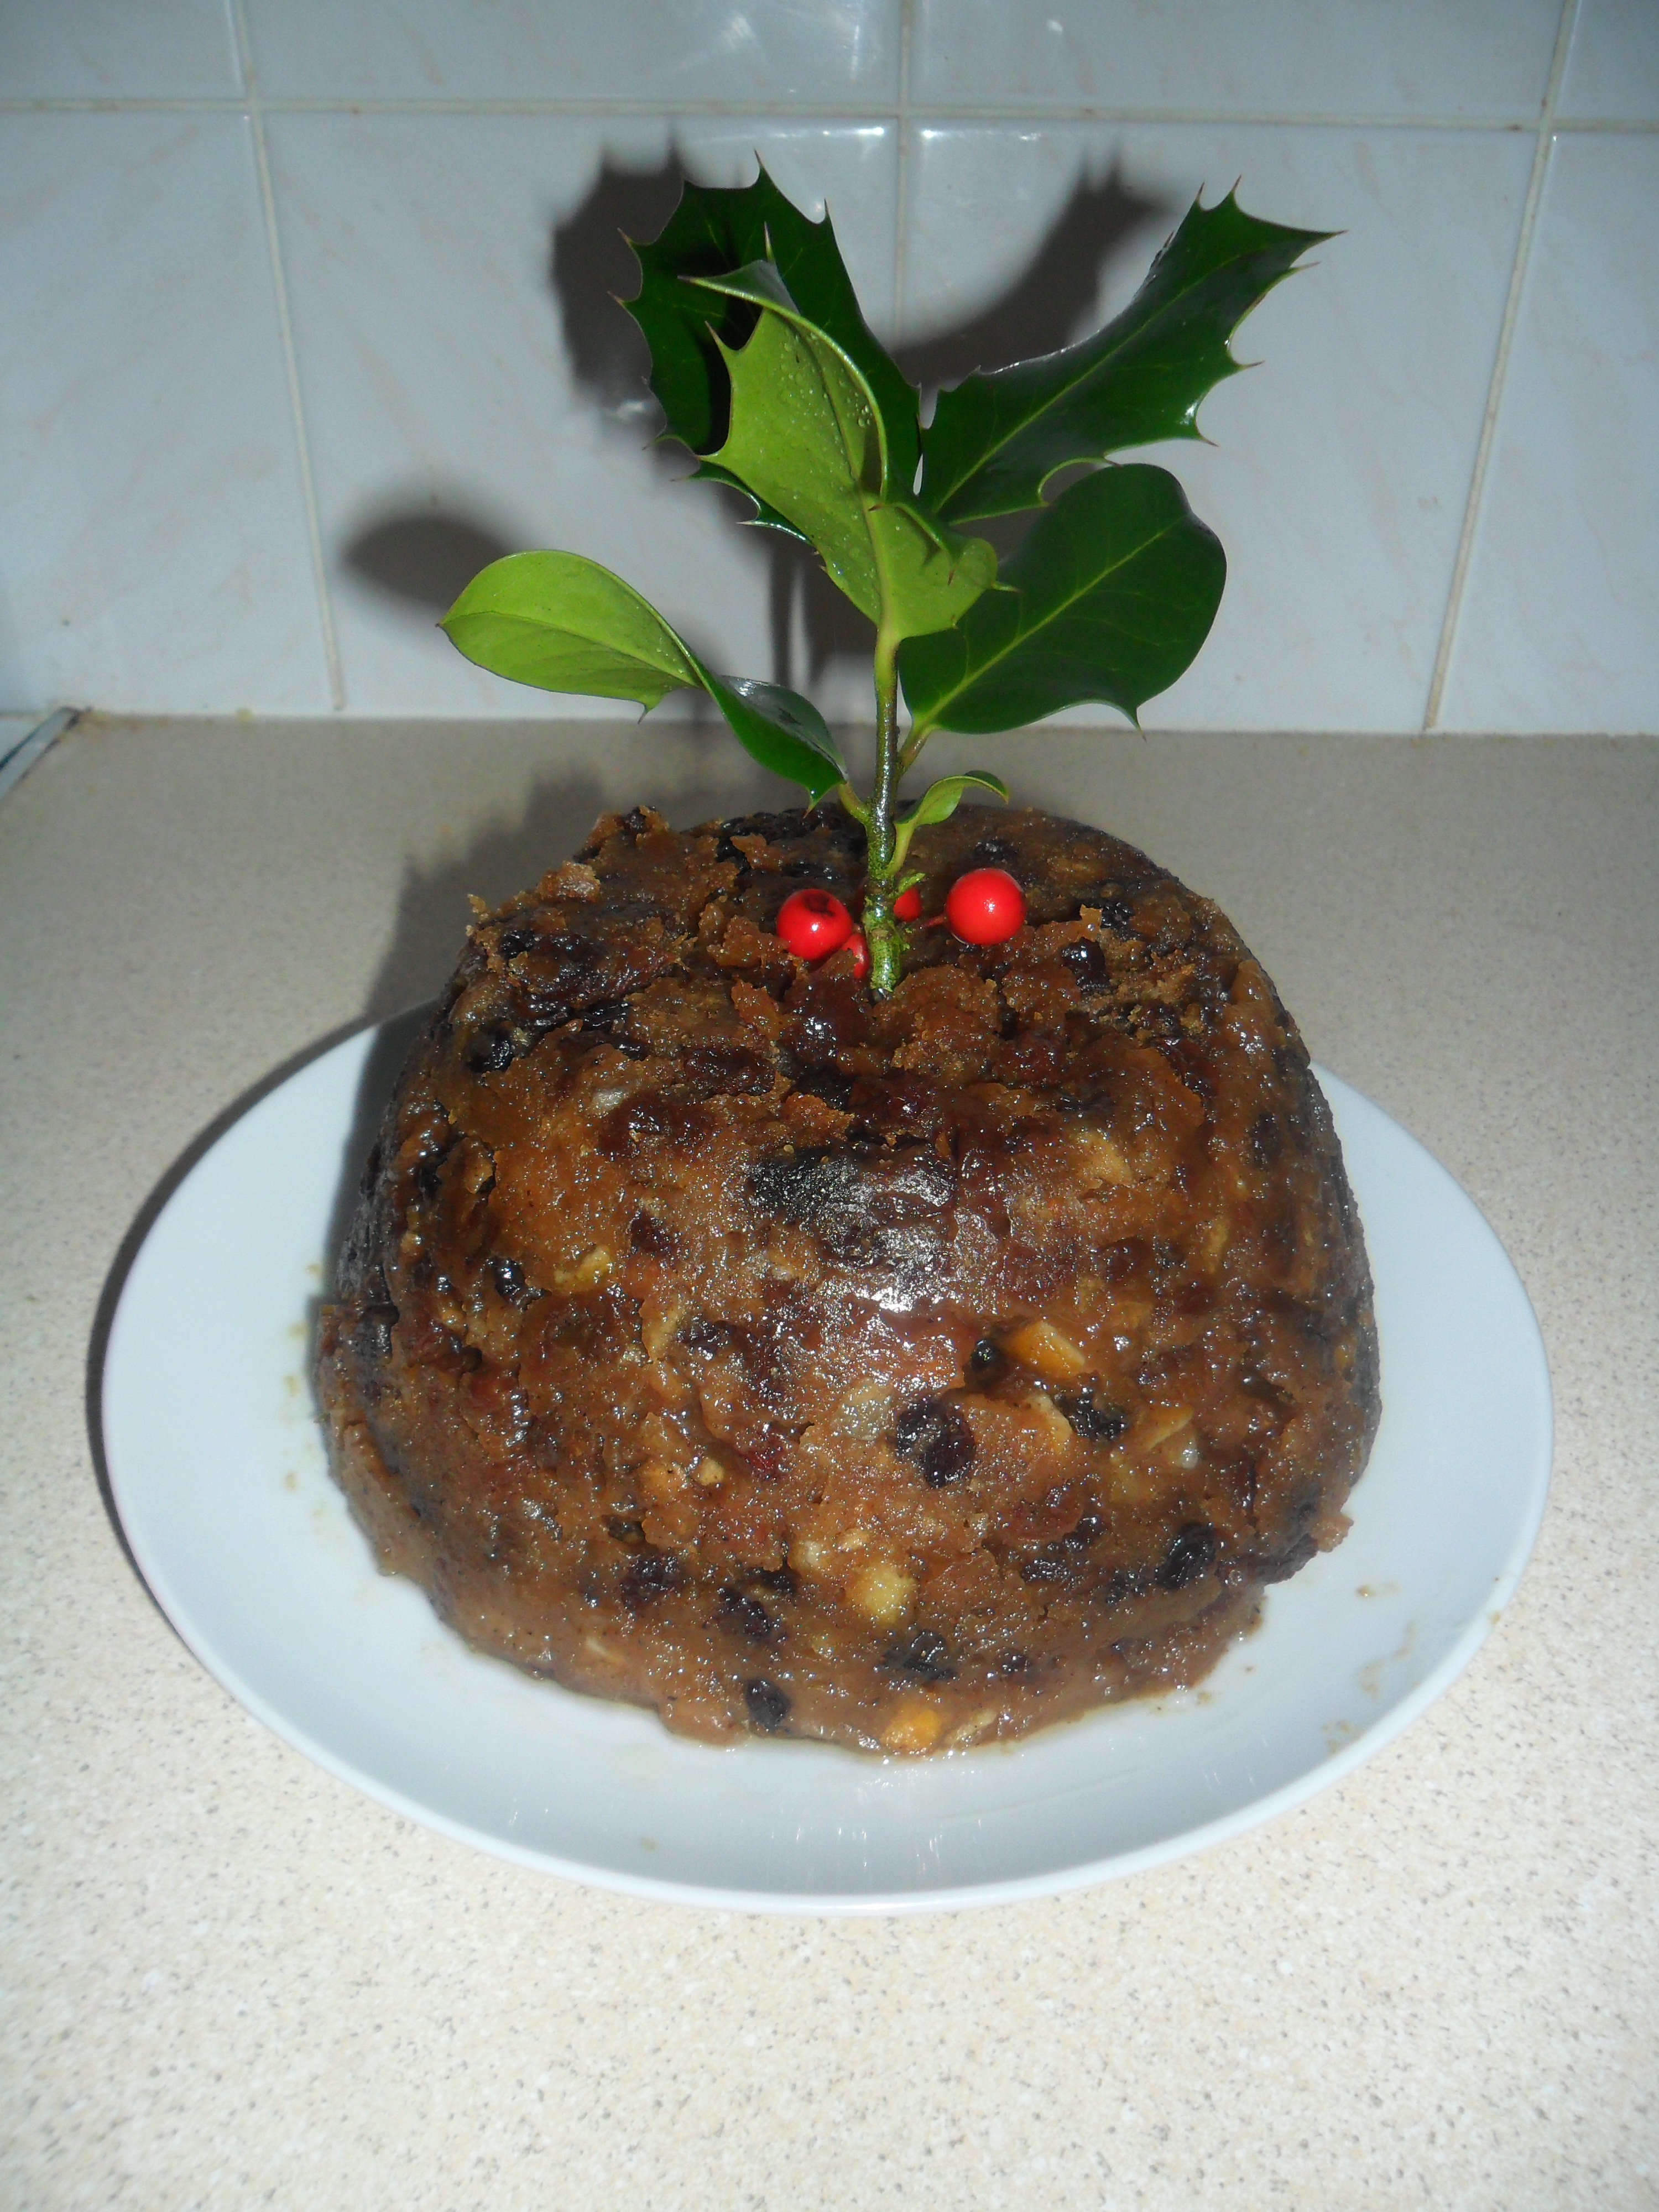 Egg free christmas pudding recipe | not just greenfingers